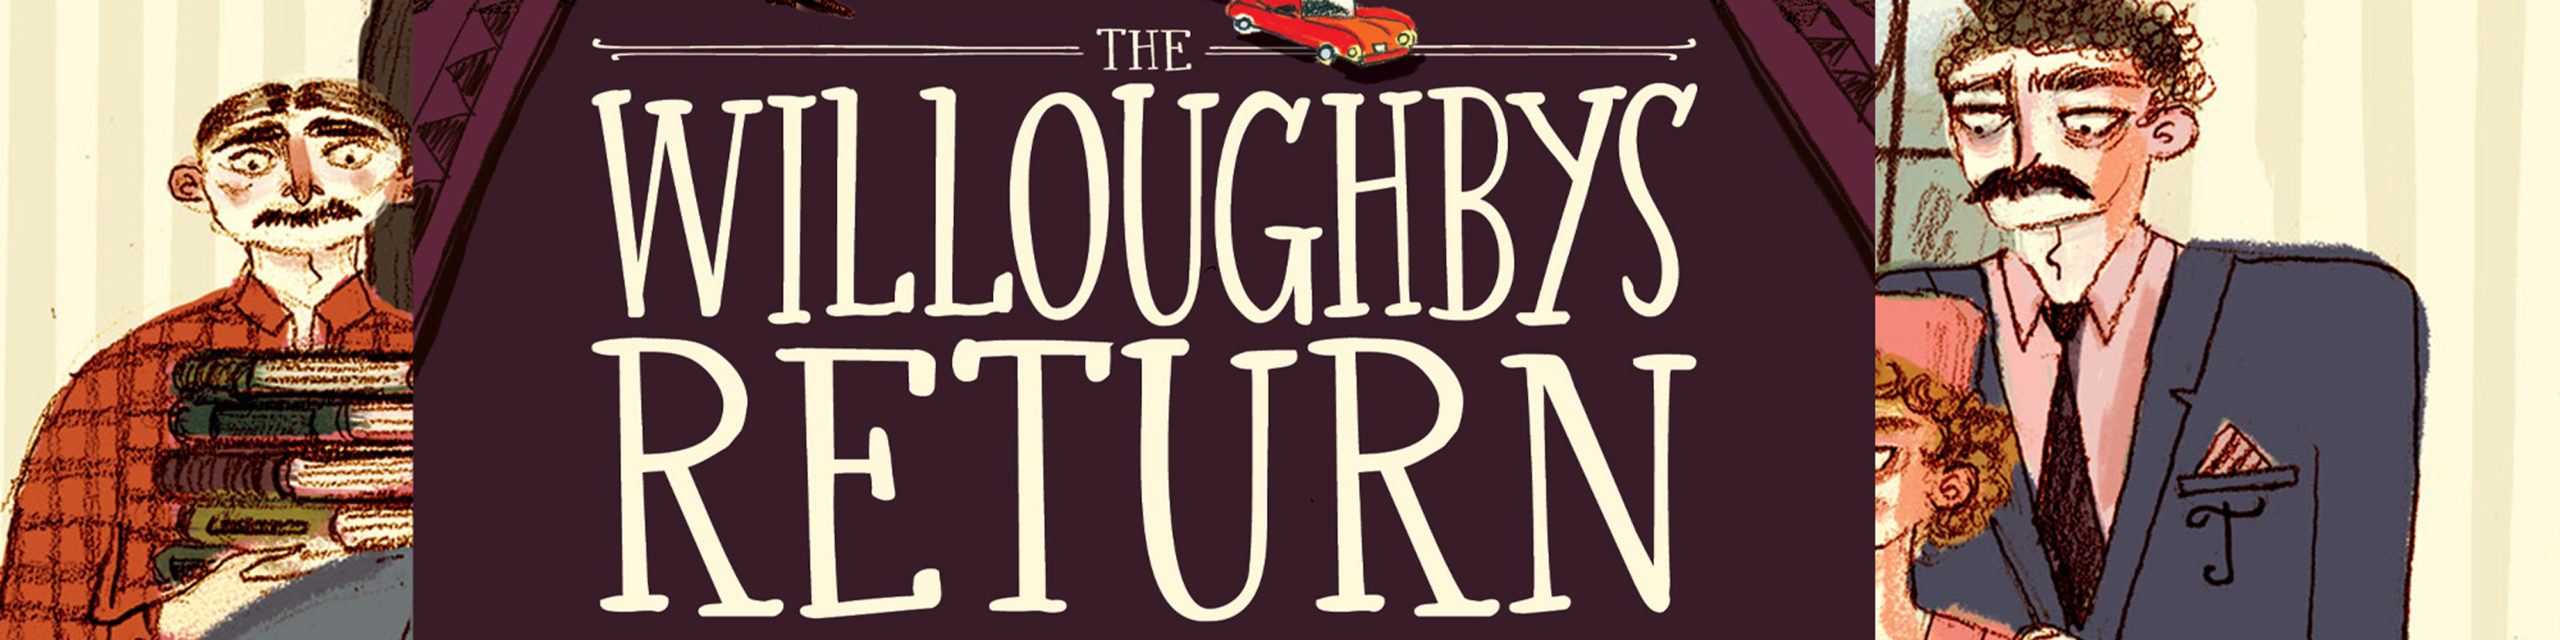 Book cover illustration with the Title The Willoughby's Return